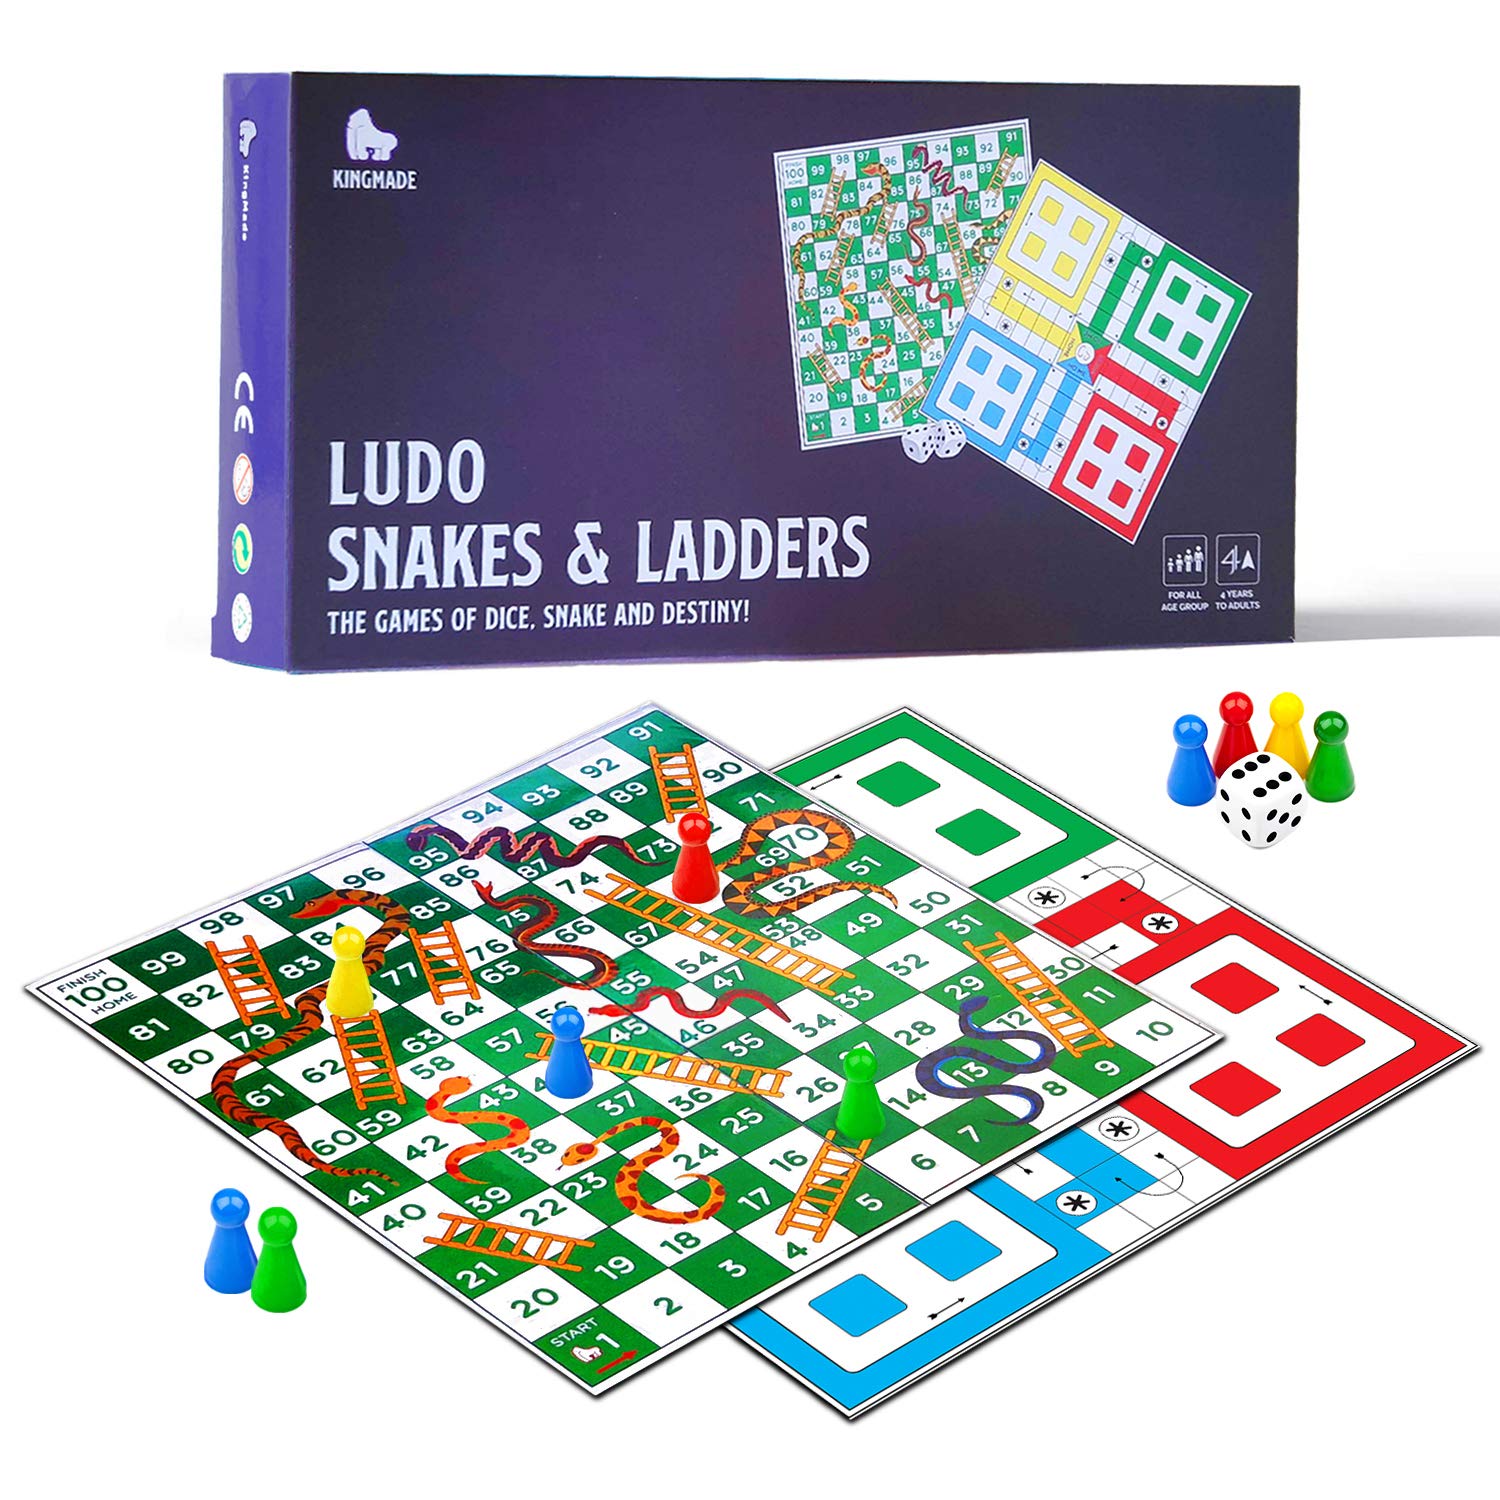 Kids Mandi Ludo Snakes Ladders Board Game Family Entertainer 4+ Years